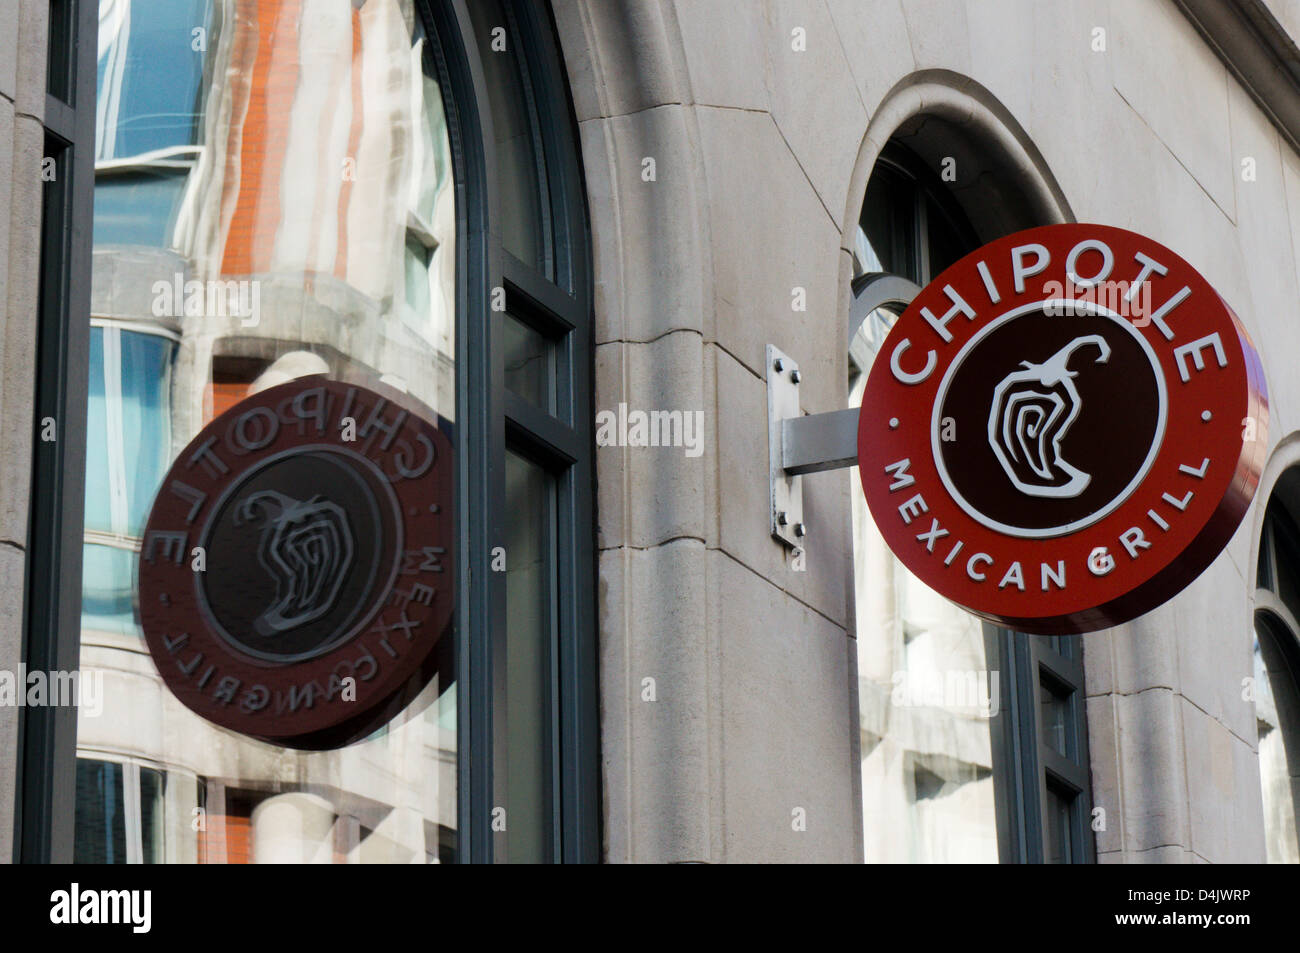 Chipotle Mexican Grill sign in Soho, London. Stock Photo